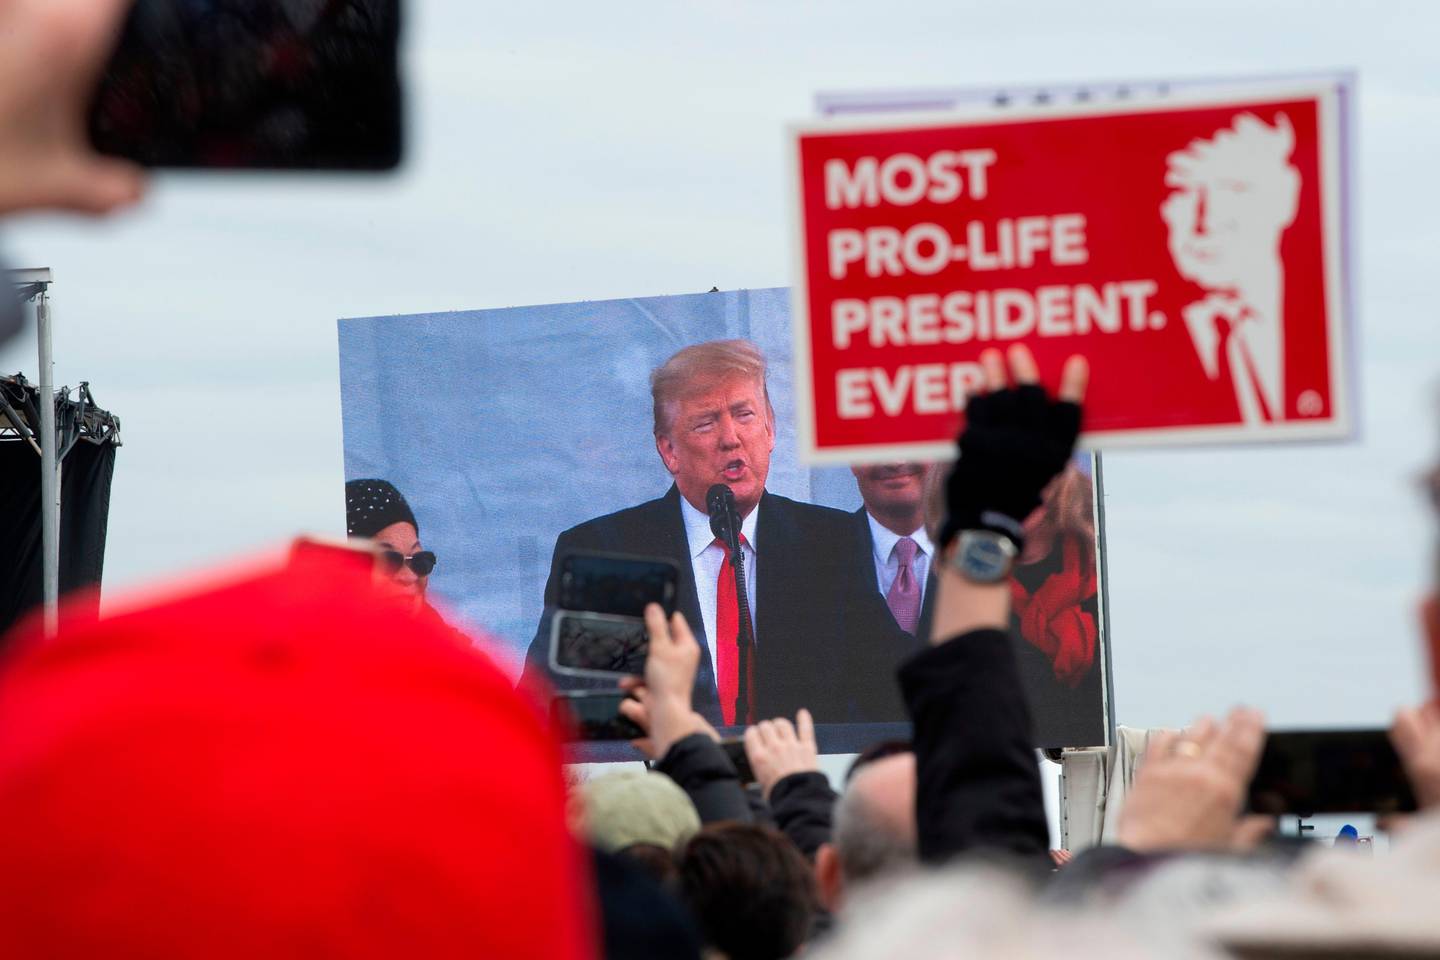 Pro-life demonstrators listen to US President Donald Trump as he speaks at the 47th annual "March for Life" in Washington, DC, on January 24, 2020. - Trump is the first US president to address in person the country's biggest annual gathering of anti-abortion campaigners. (Photo by Roberto SCHMIDT / AFP)